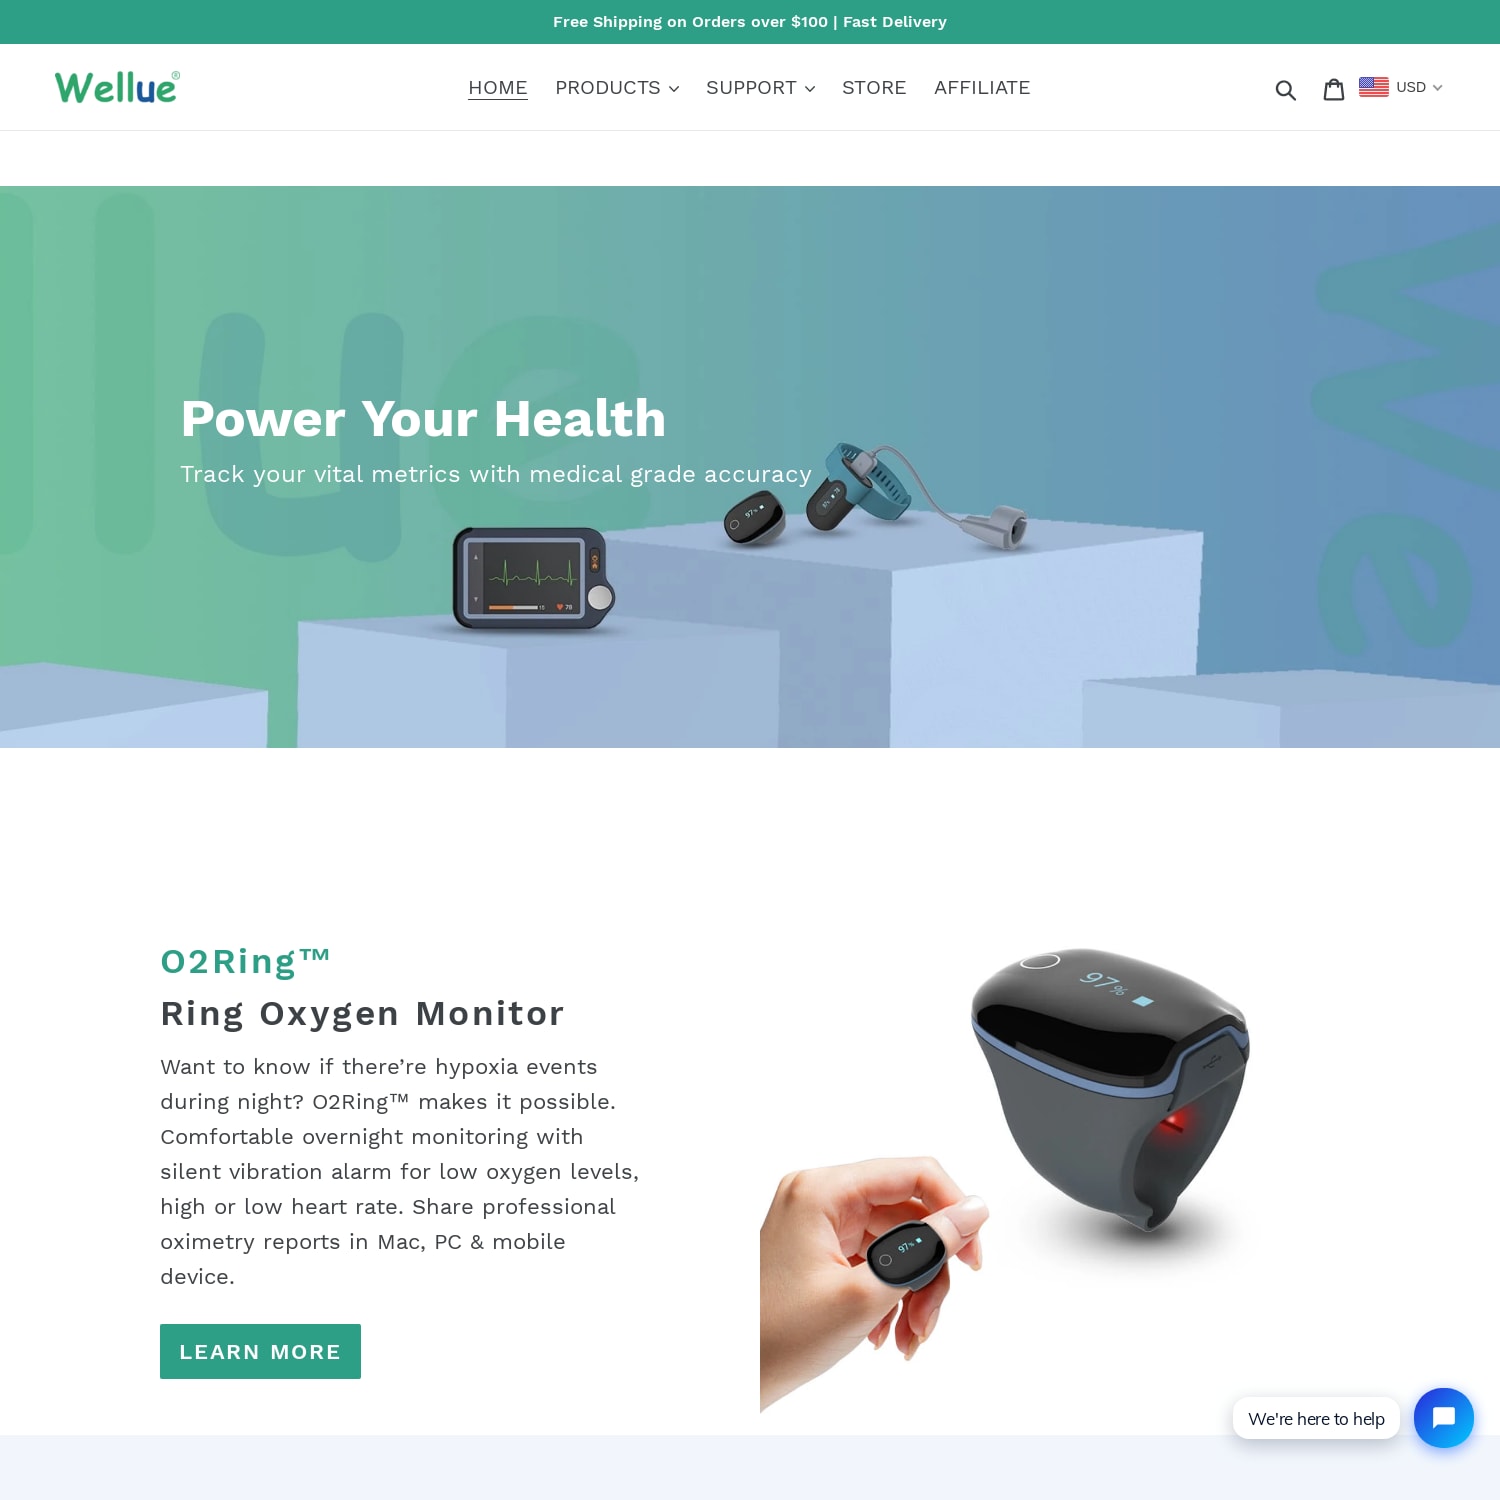 Wellue - Innovative Technology Powers Your Health